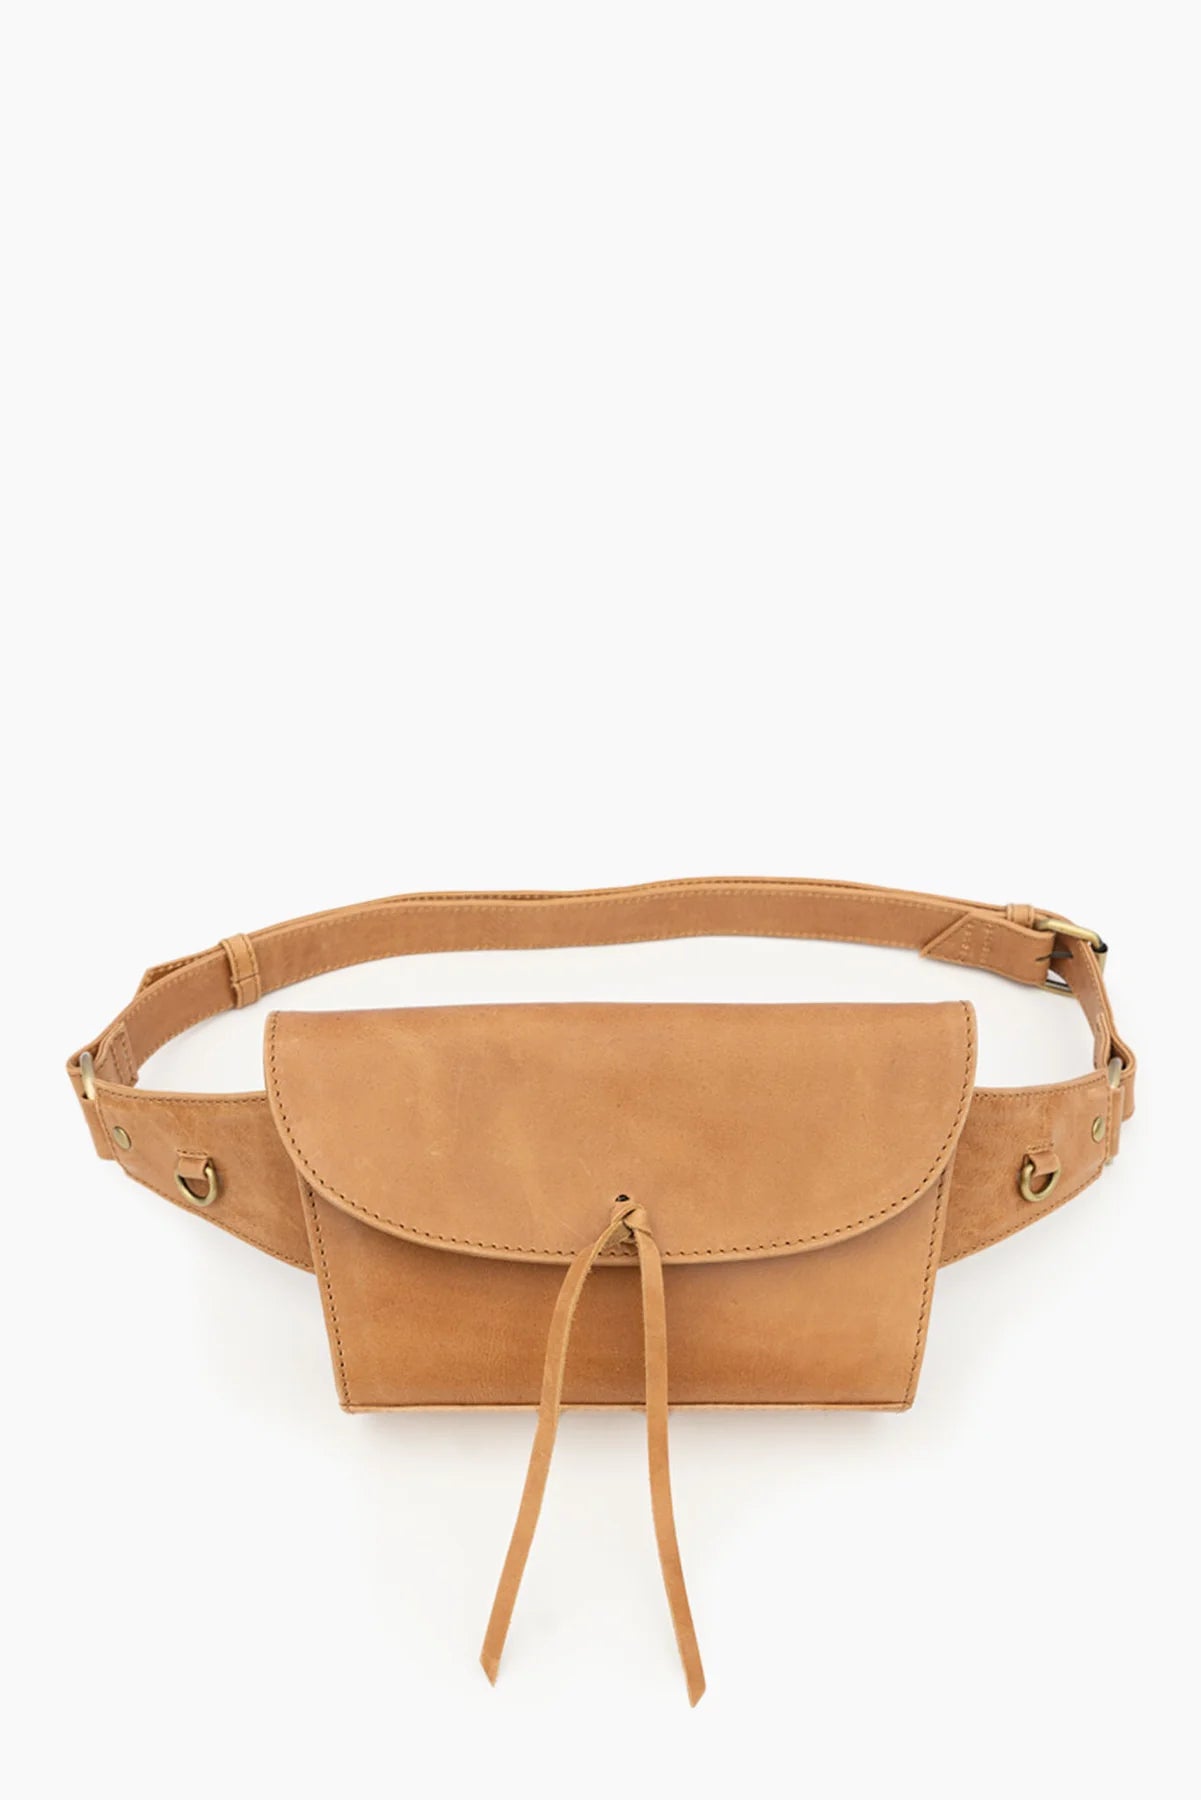 Load image into Gallery viewer, Solma Fanny Pack - Camel - Small/Medium
